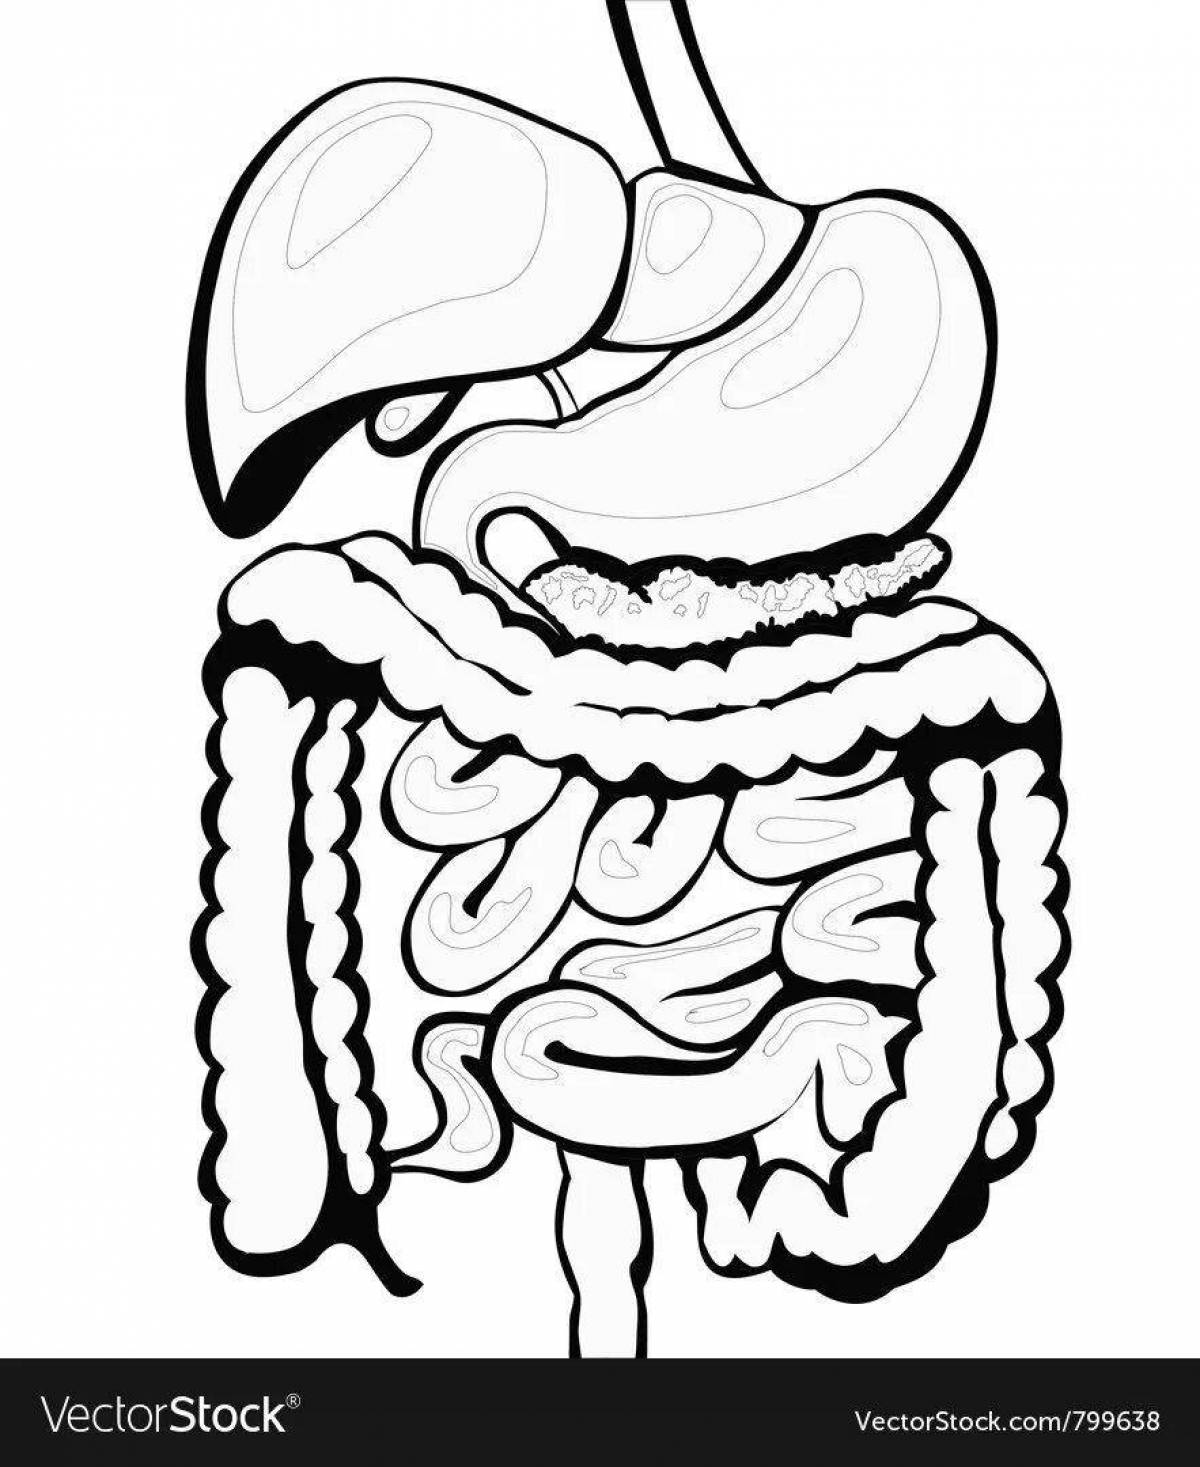 Amazing Digestive System Coloring Page